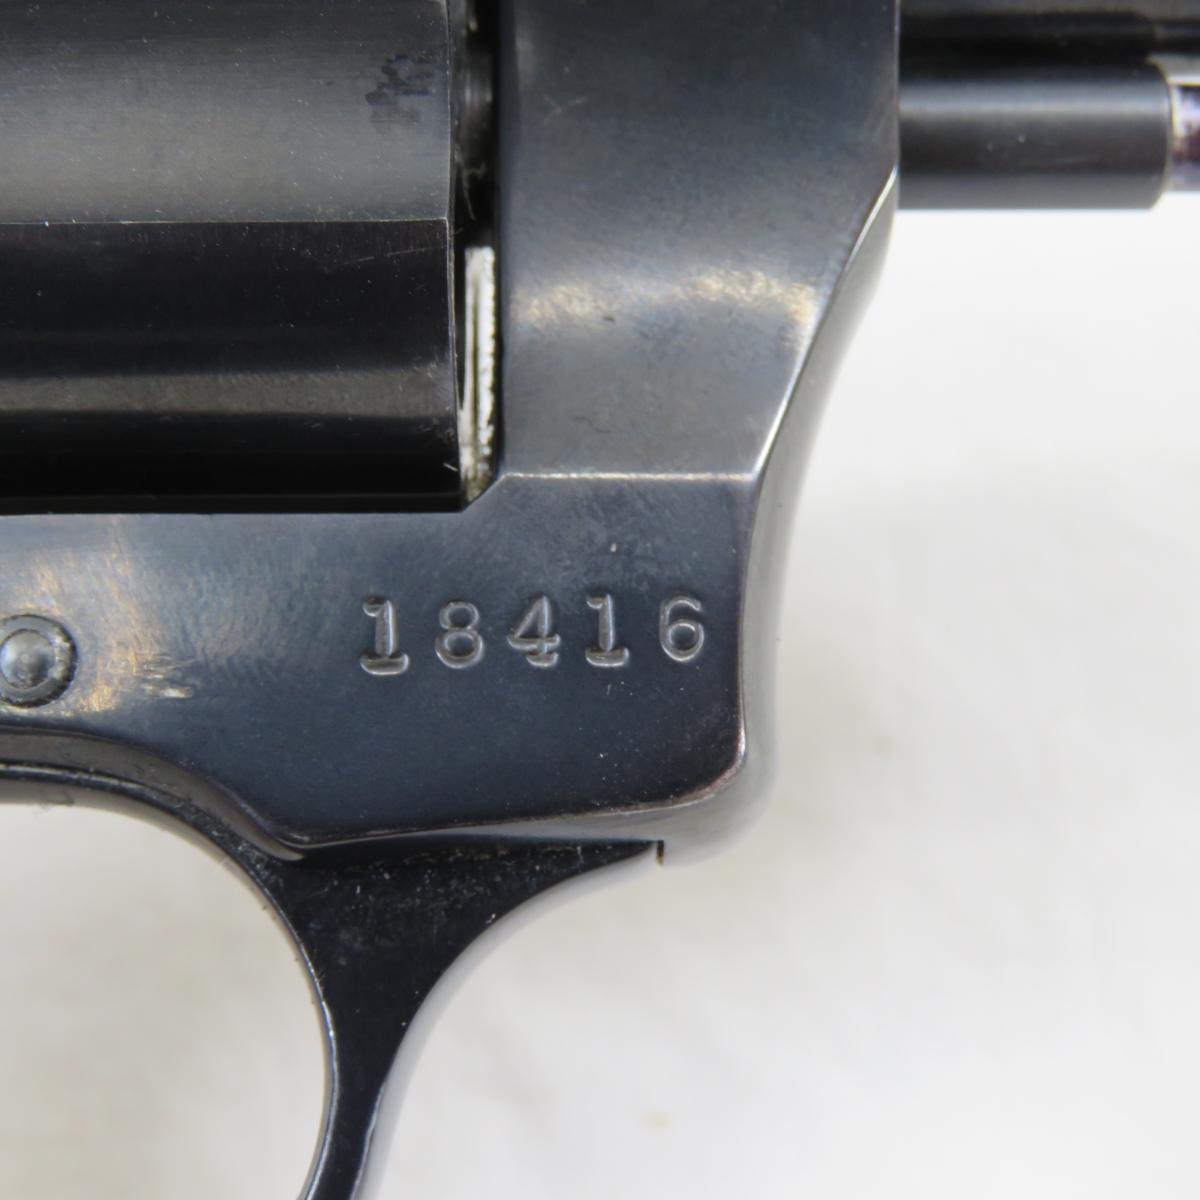 Sold at Auction: CHARTER ARMS Undercover DA Revolver 38 Special